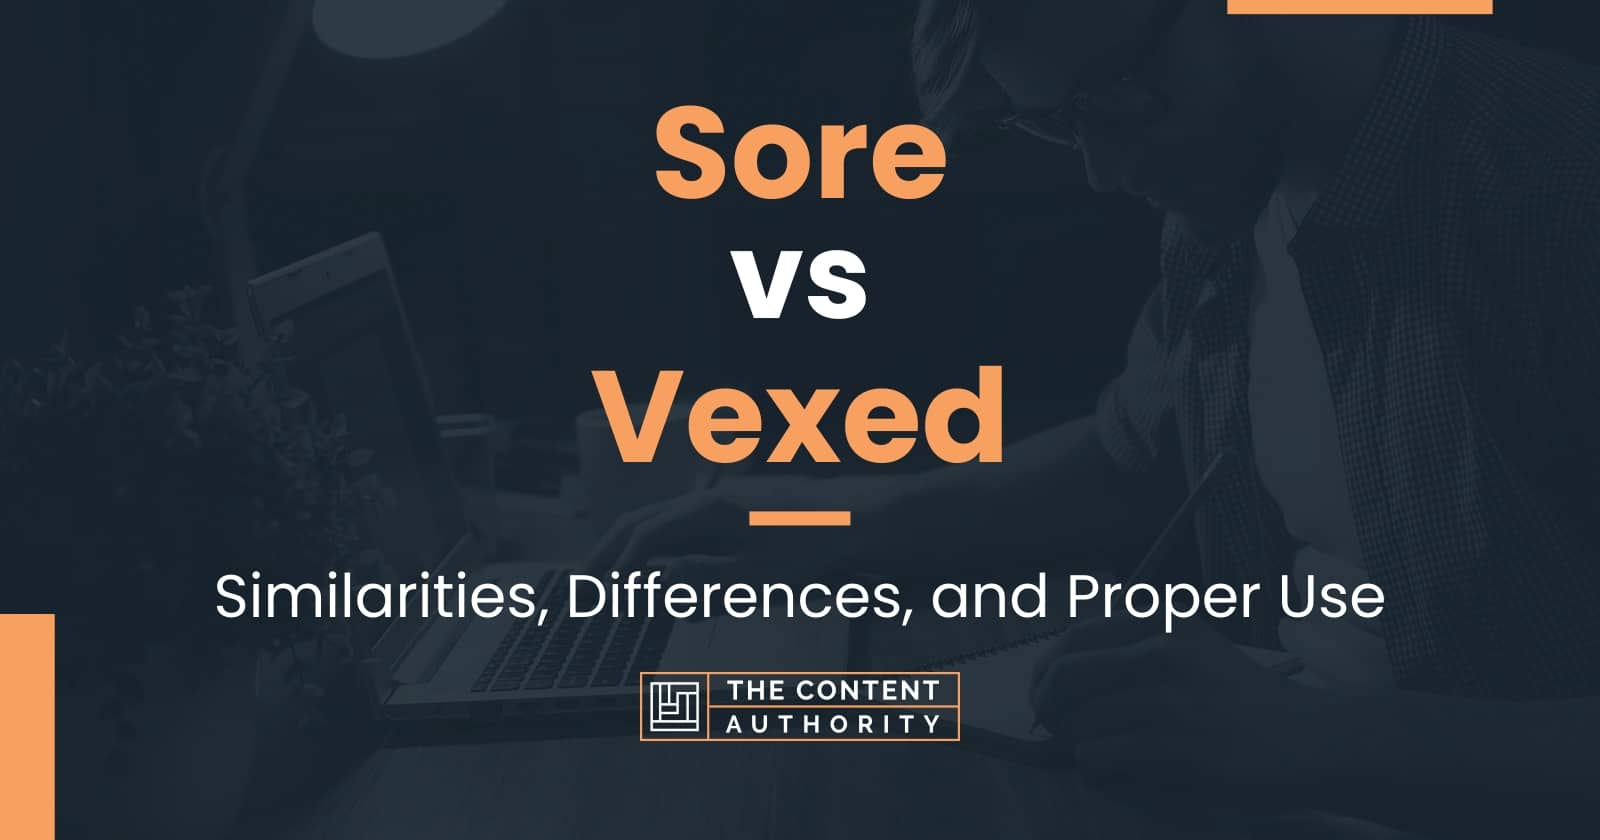 sore-vs-vexed-similarities-differences-and-proper-use